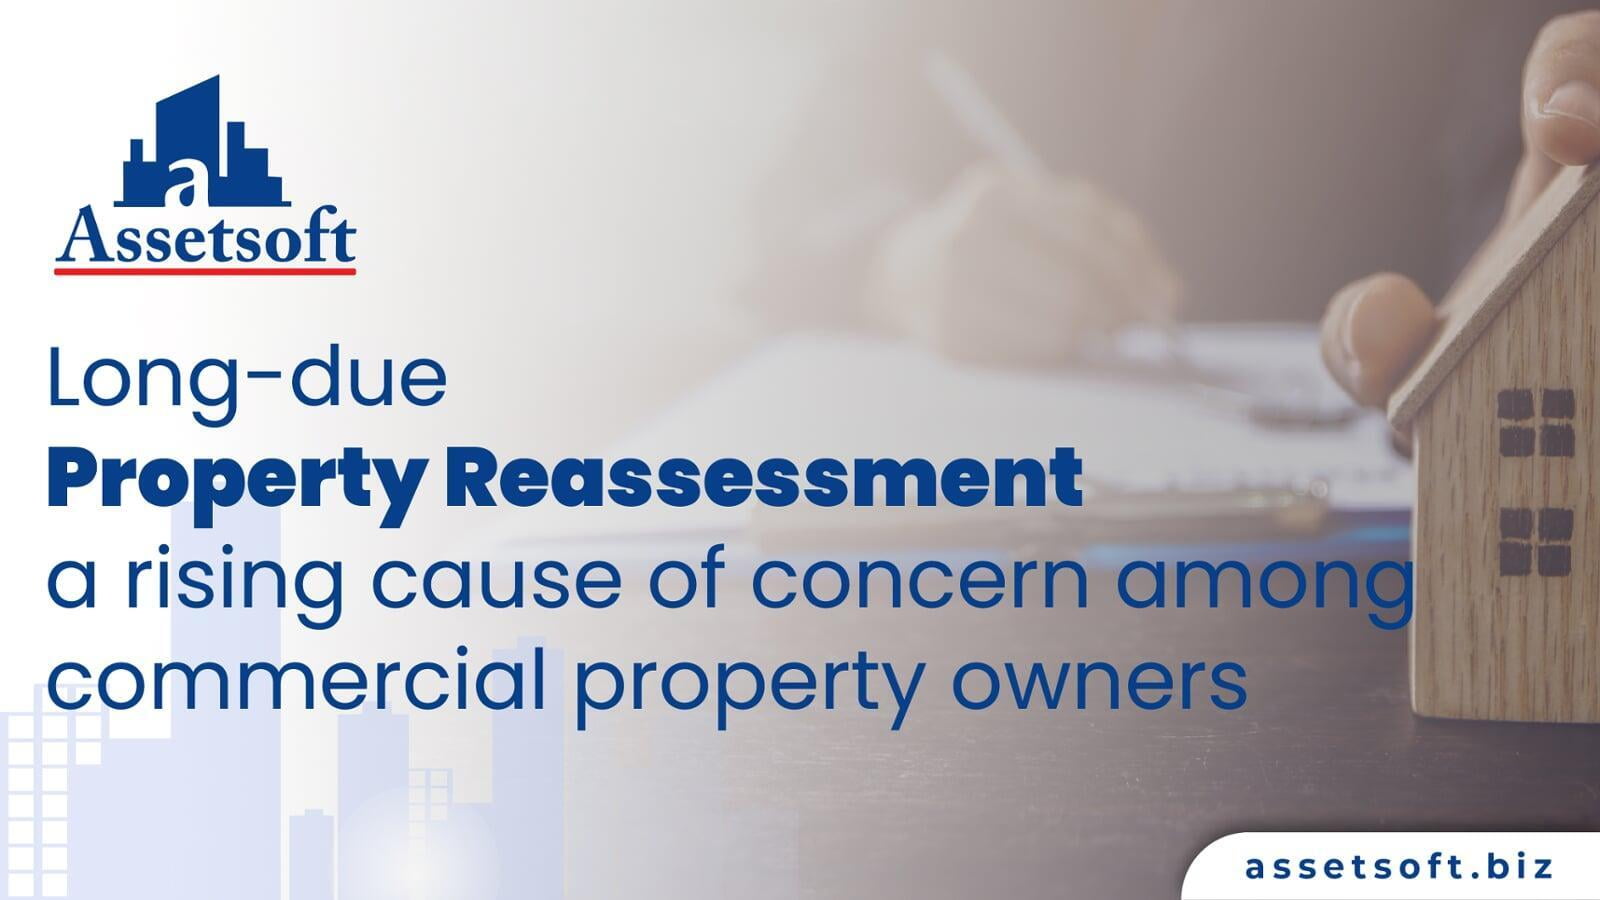 Long-due property reassessment in Ontario a rising cause of concern among commercial property owners 